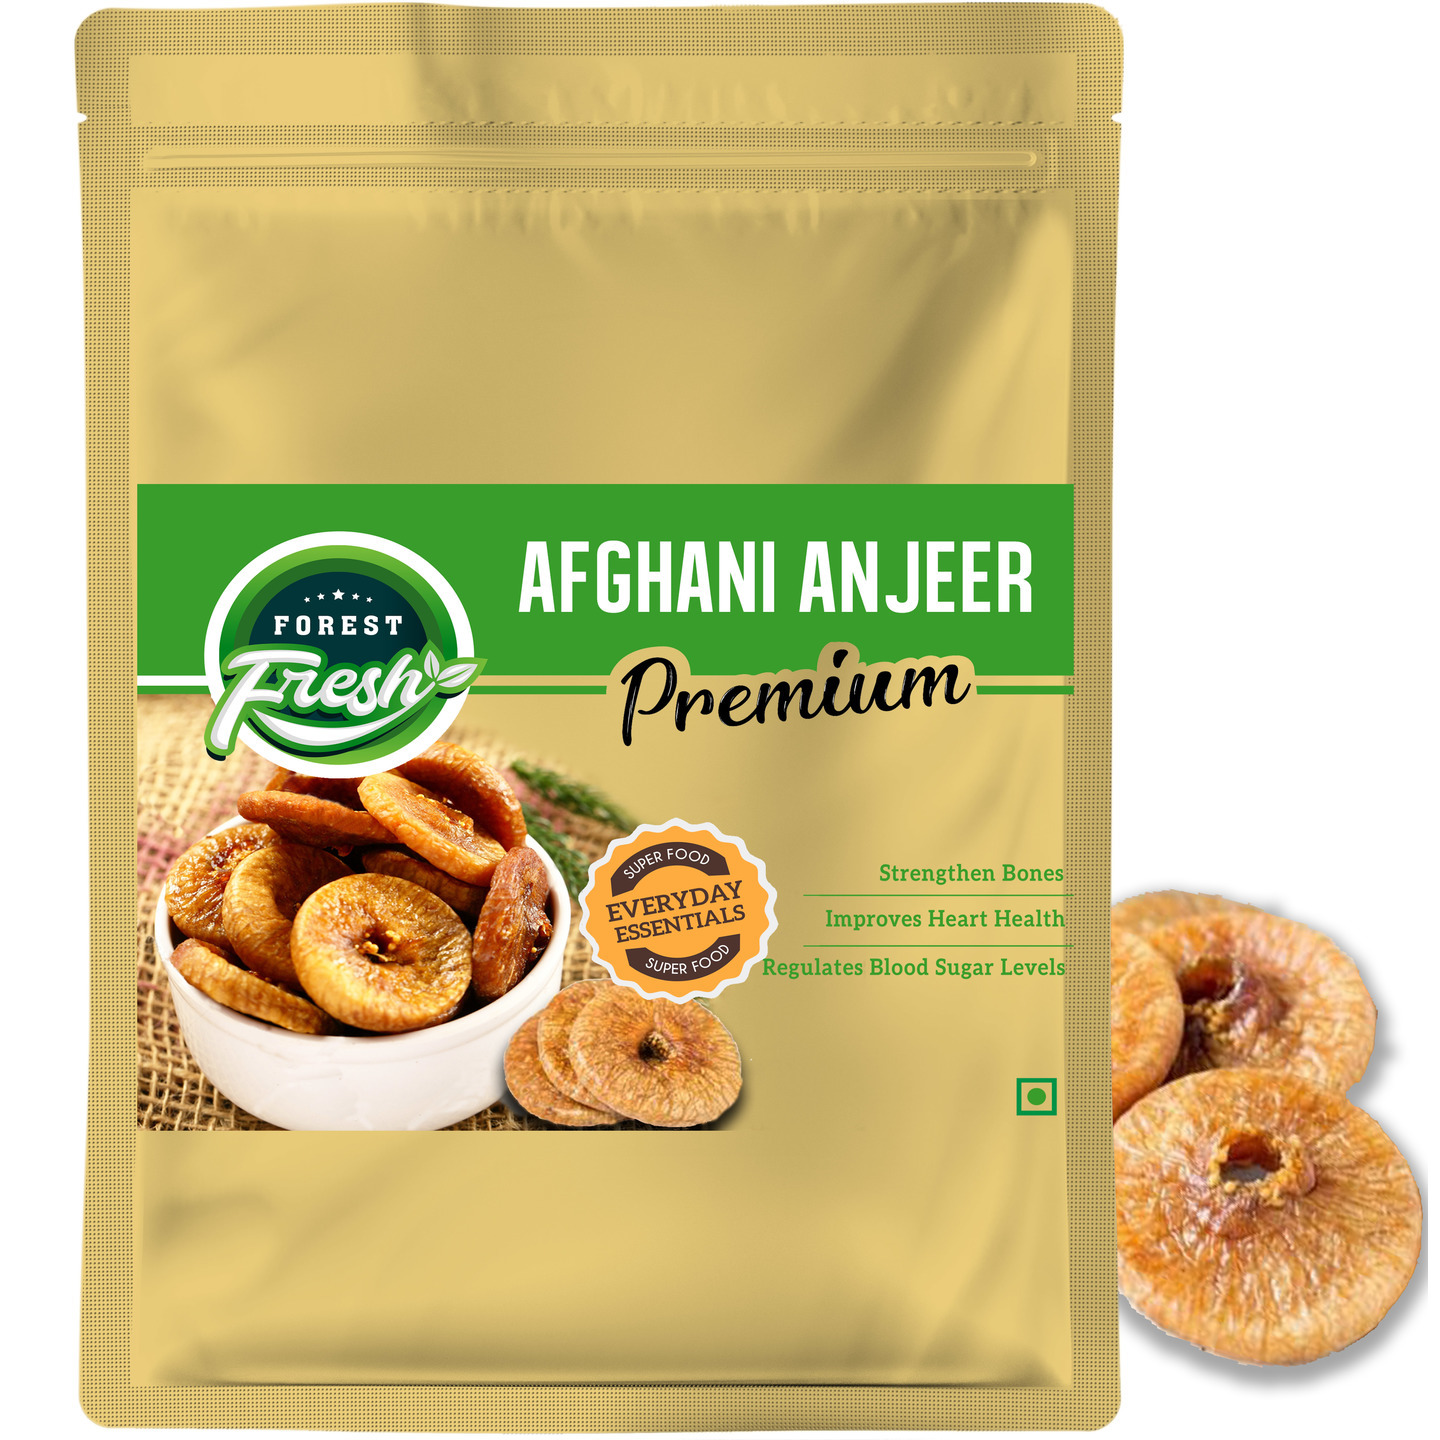 Forest Fresh Premium Afghani Anjeer (Dried Figs) - 250g - Everyday Essential Superfood - Dry Fruits & Nuts